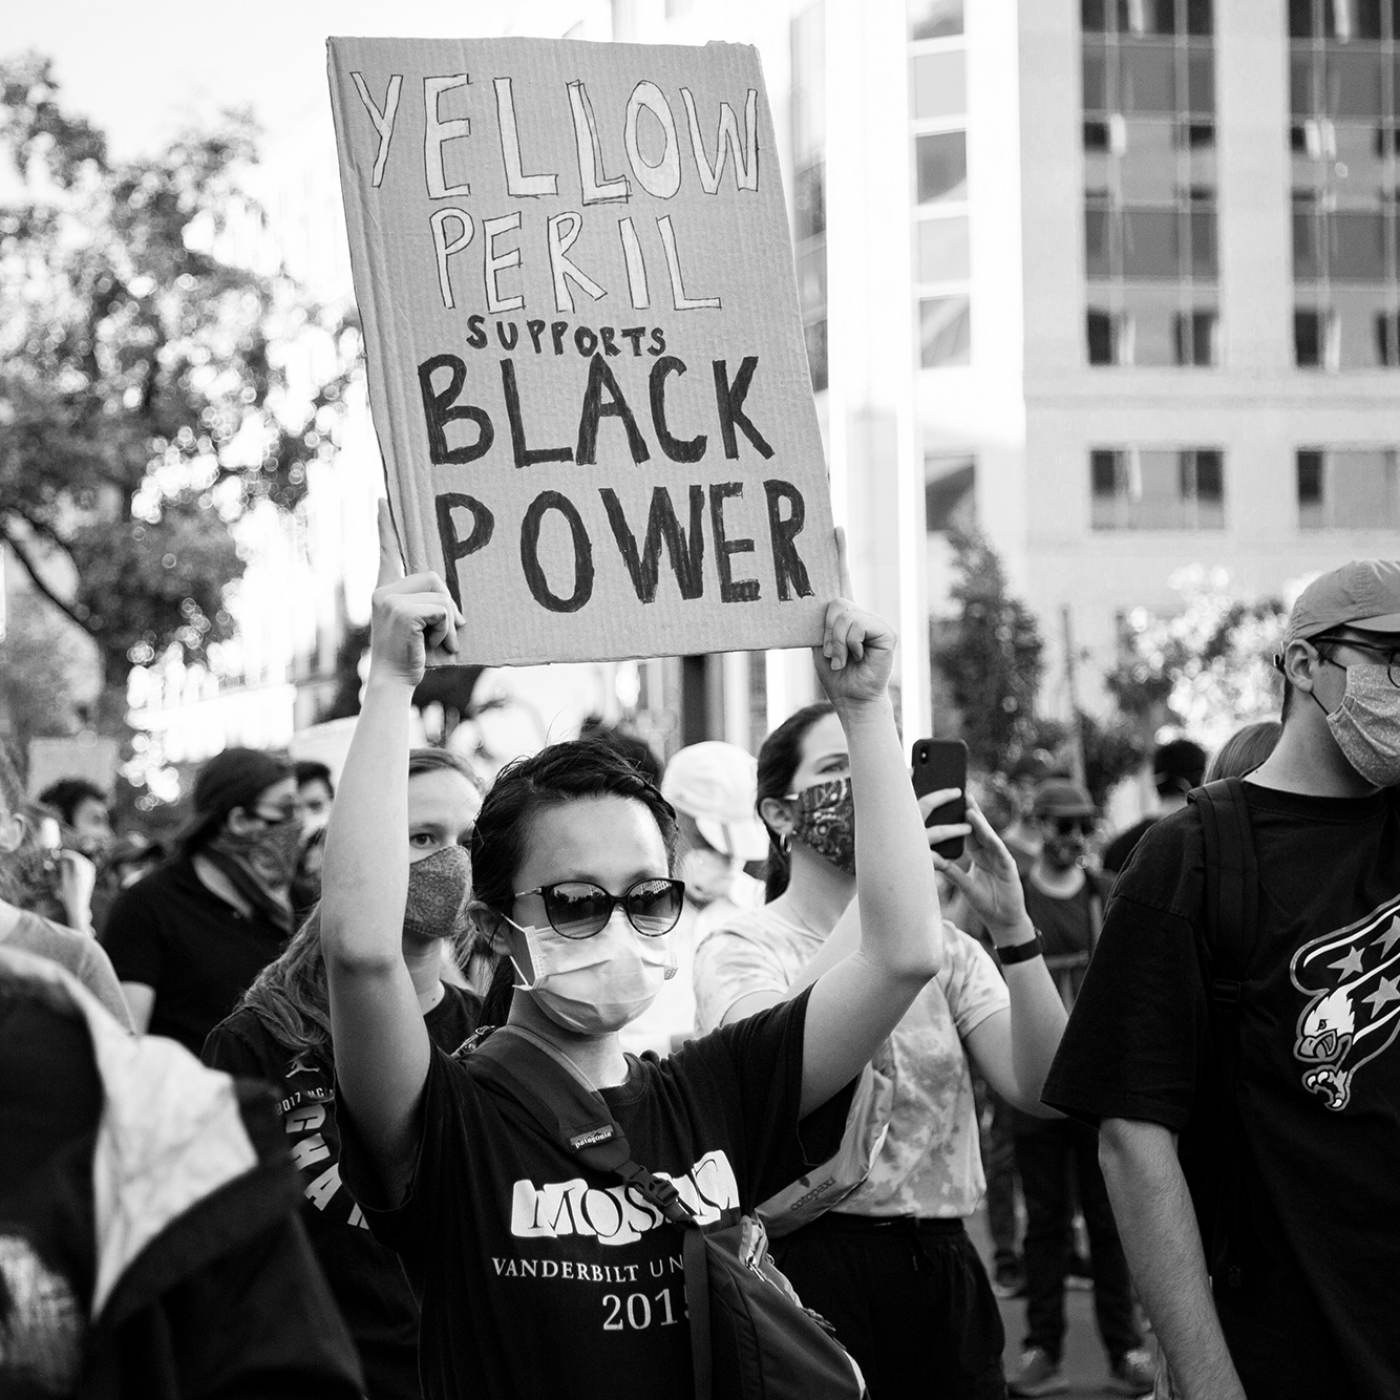 Asians for Black Lives: An unnamed woman at a Black Lives Matter rally near the White House, Washington DC. She is holding a sign that says “Yellow Peril Supports Black Power.”  Photograph by Mengyu Dong